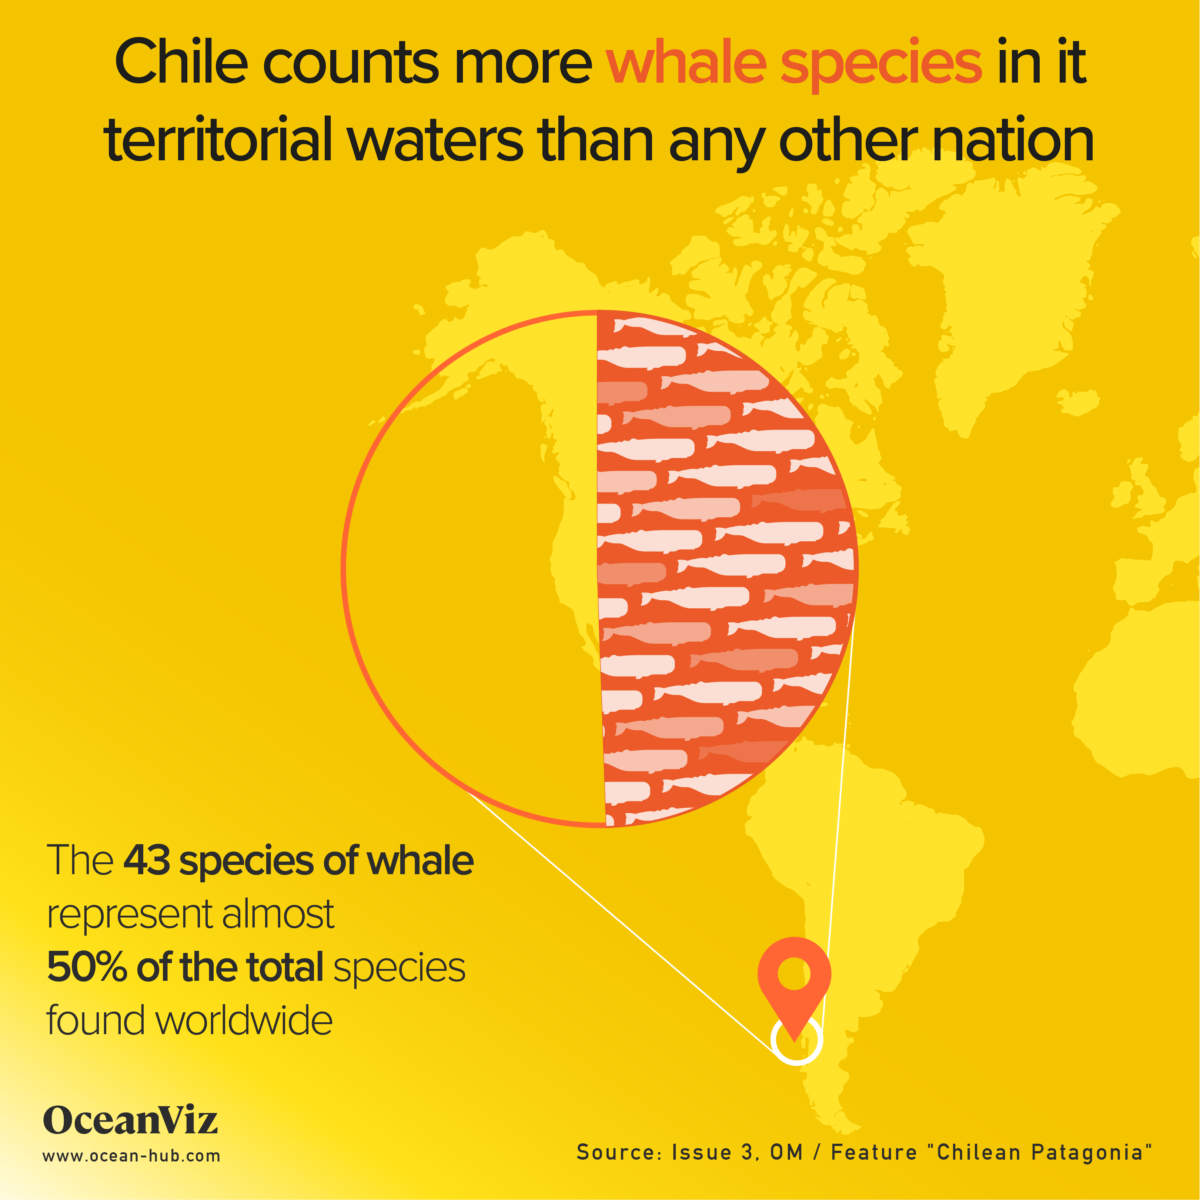 Whale species in Chile